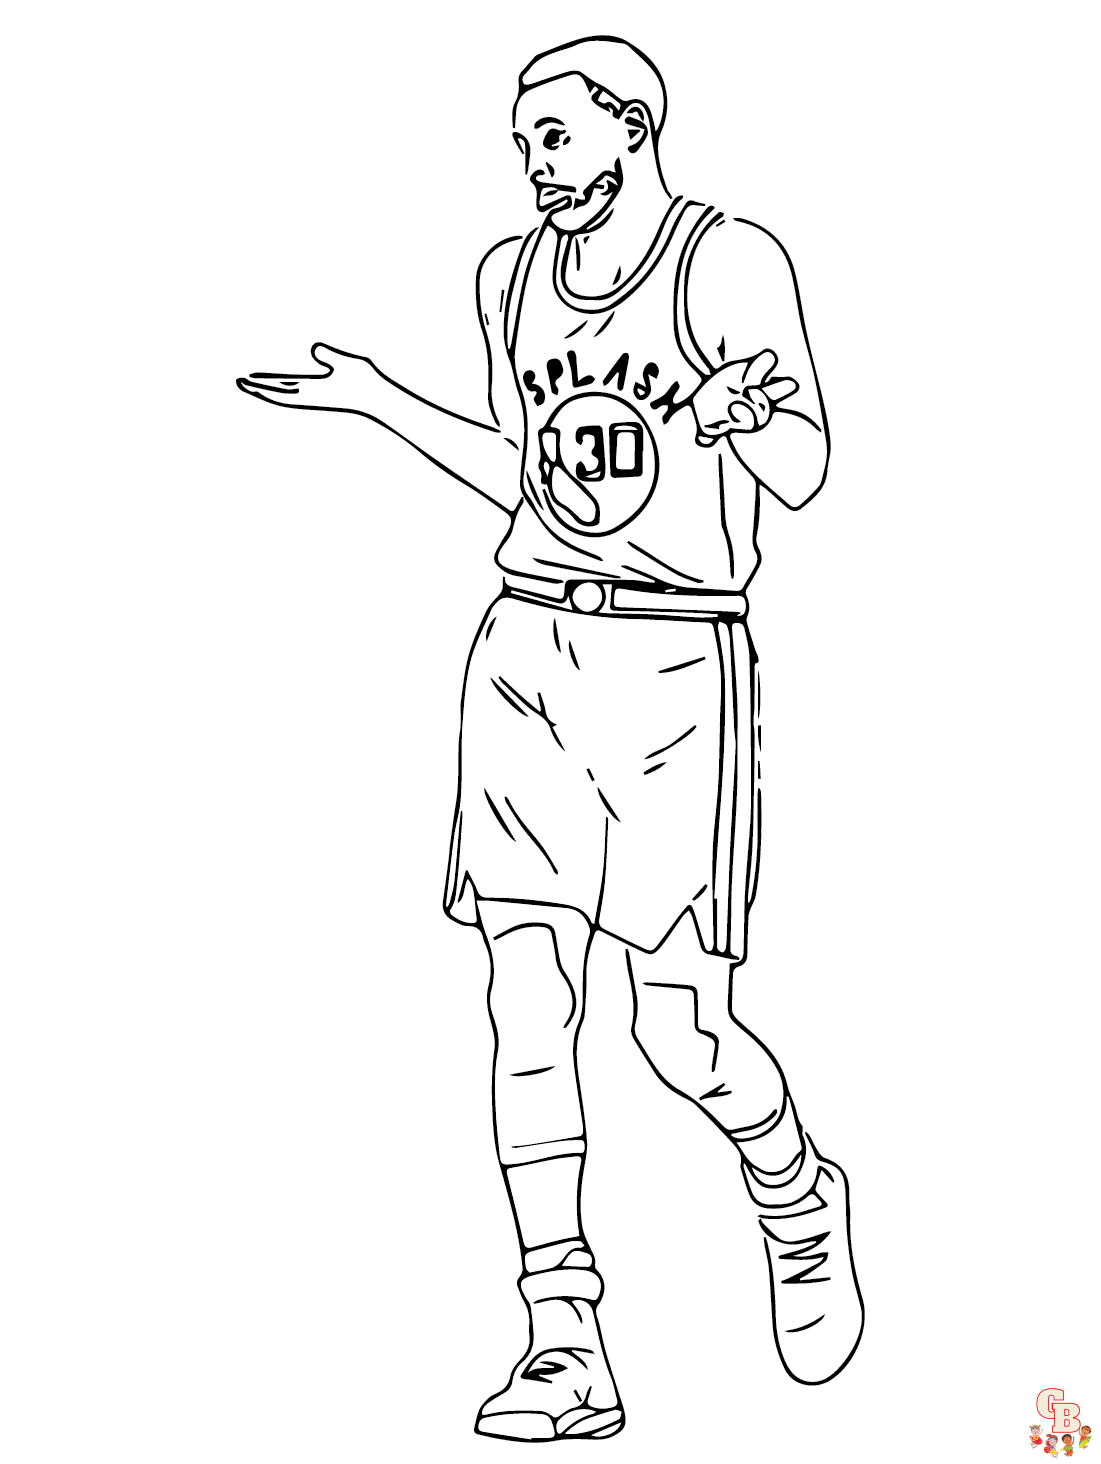 Stephen Curry coloring pages to print